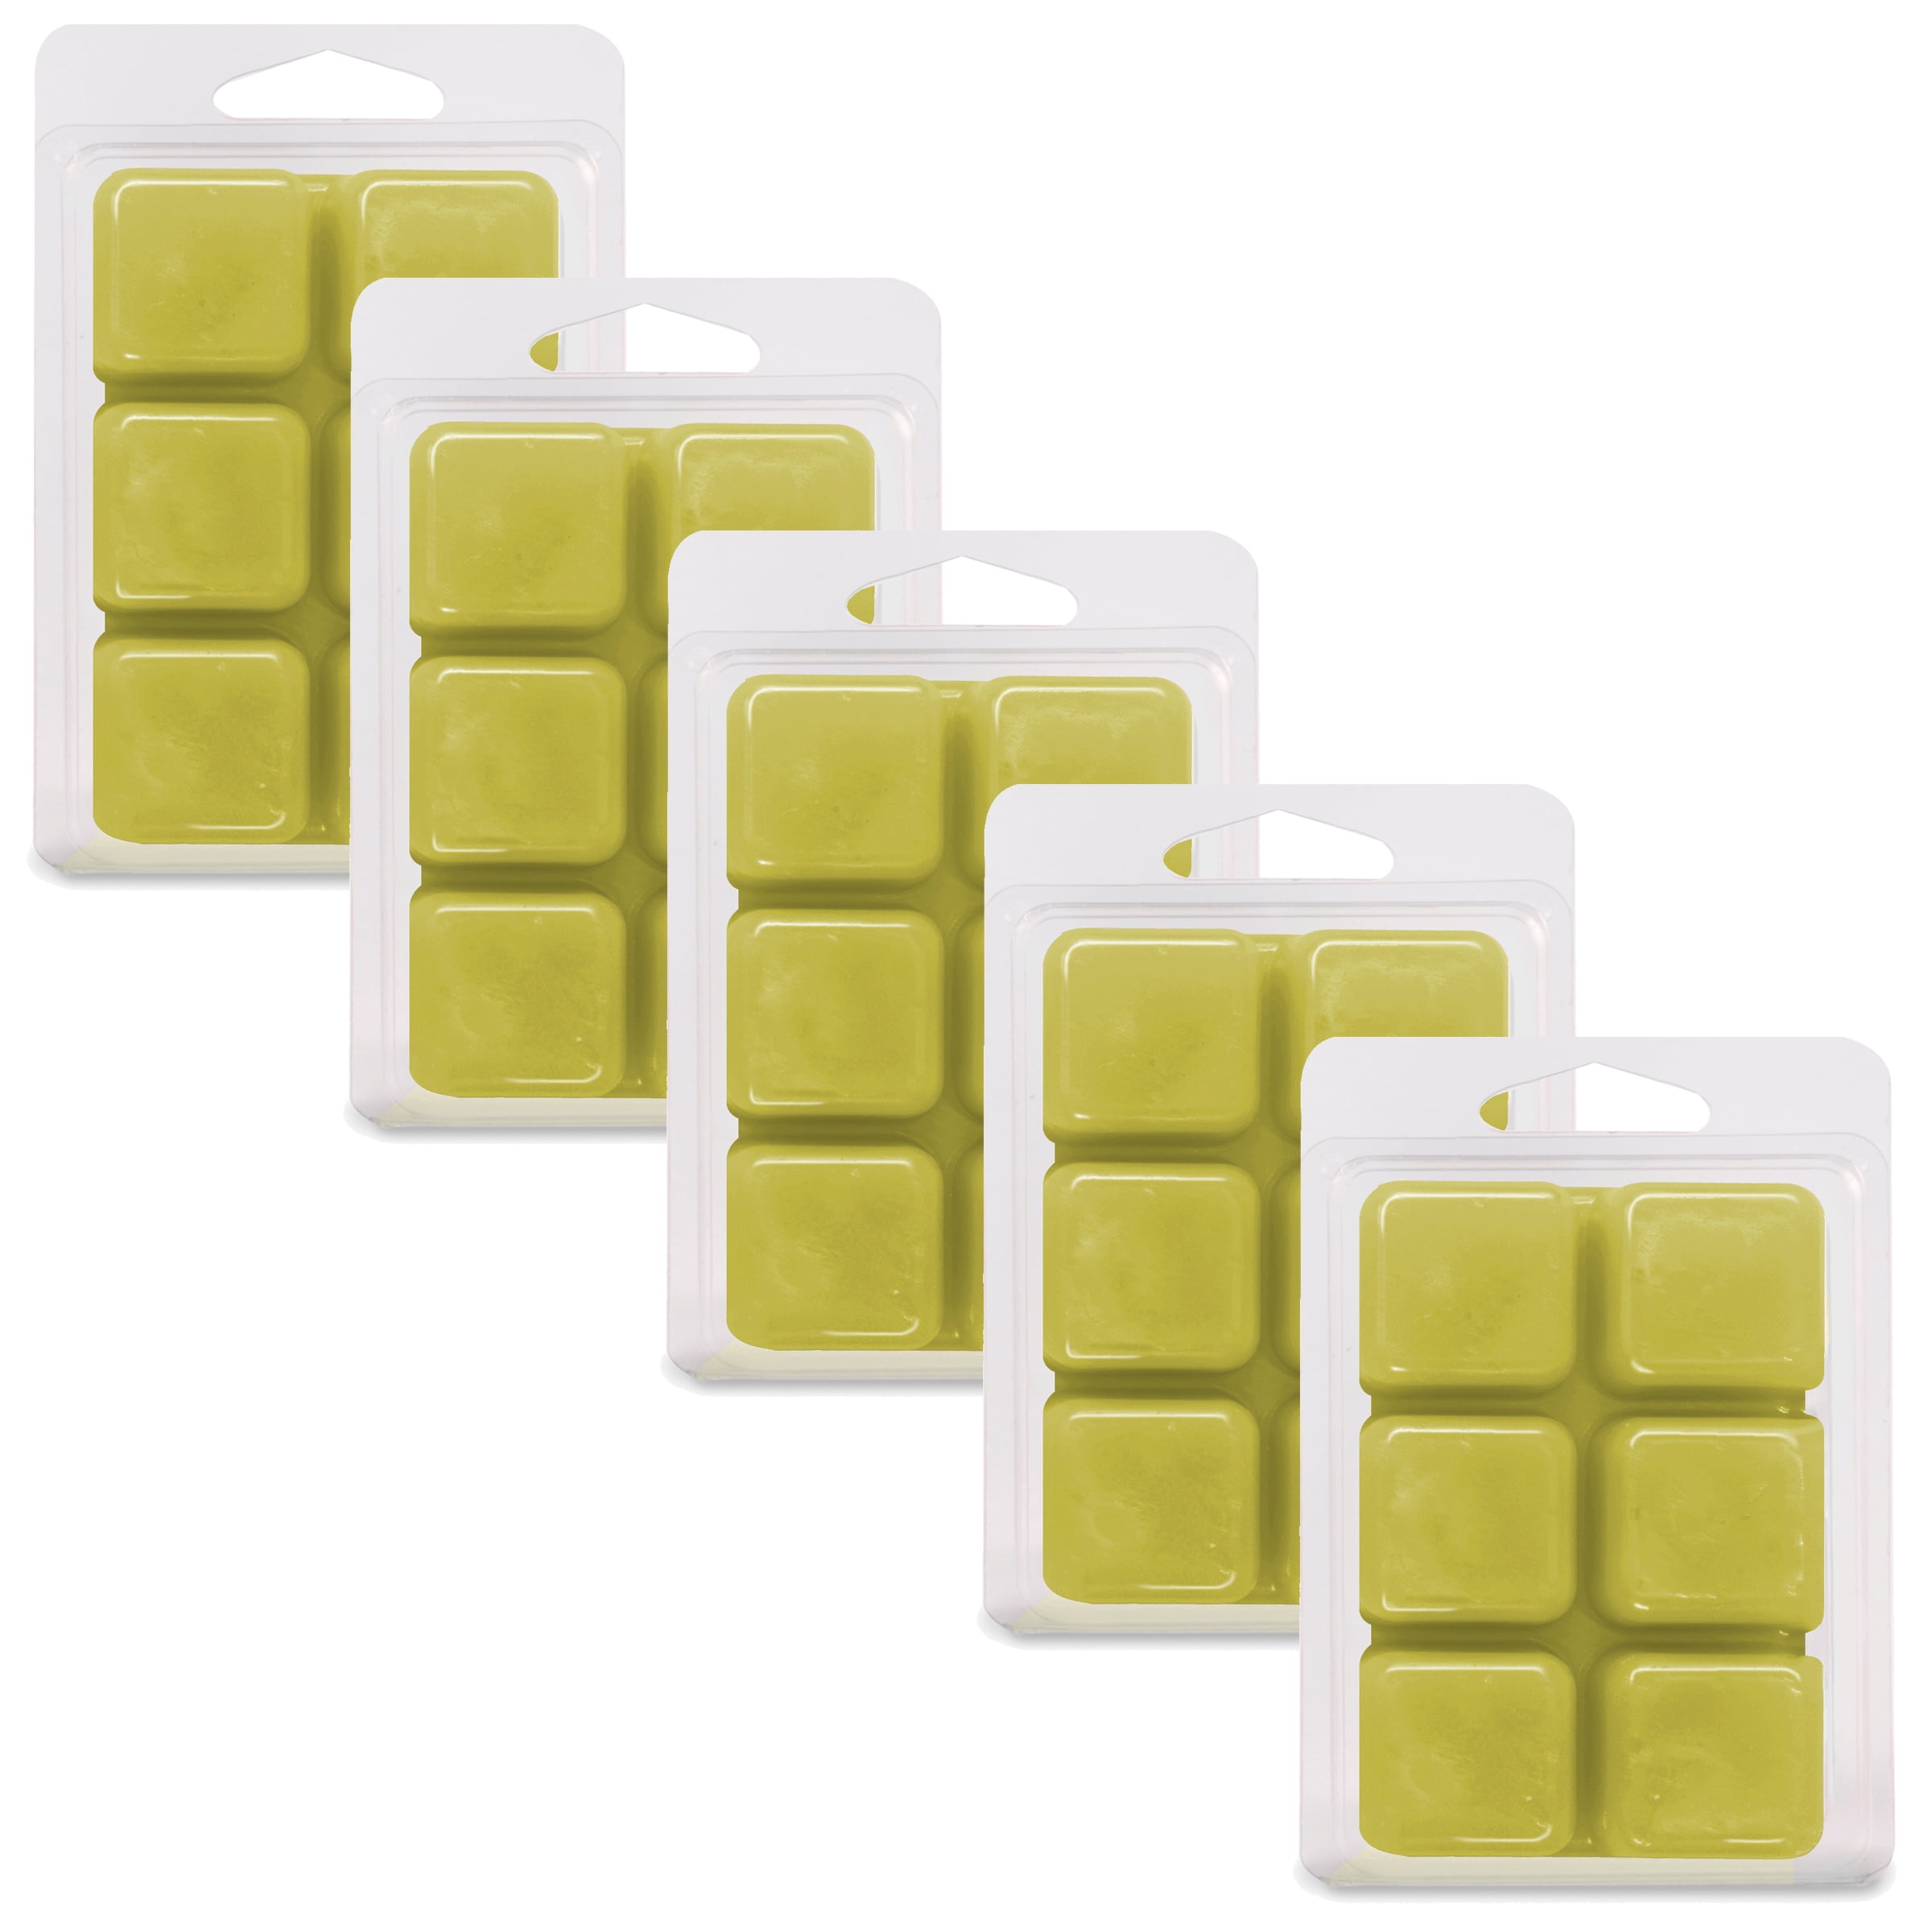 Honeysuckle Glow Scented Wax Melts, Better Homes & Gardens, 2.5 oz (5-Pack)